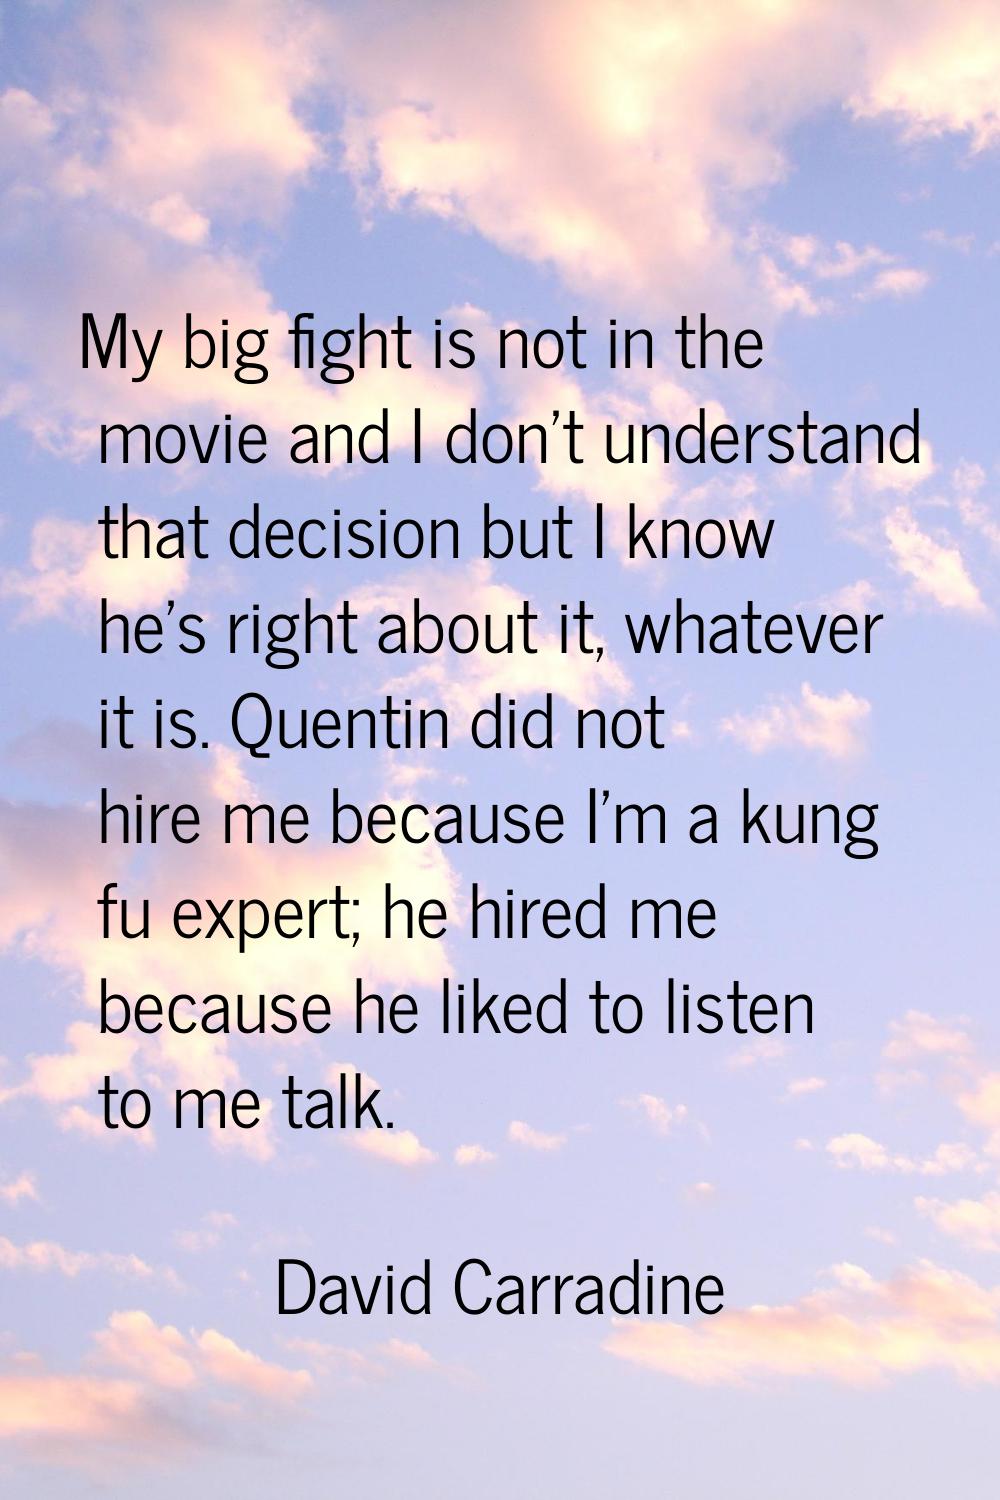 My big fight is not in the movie and I don't understand that decision but I know he's right about i